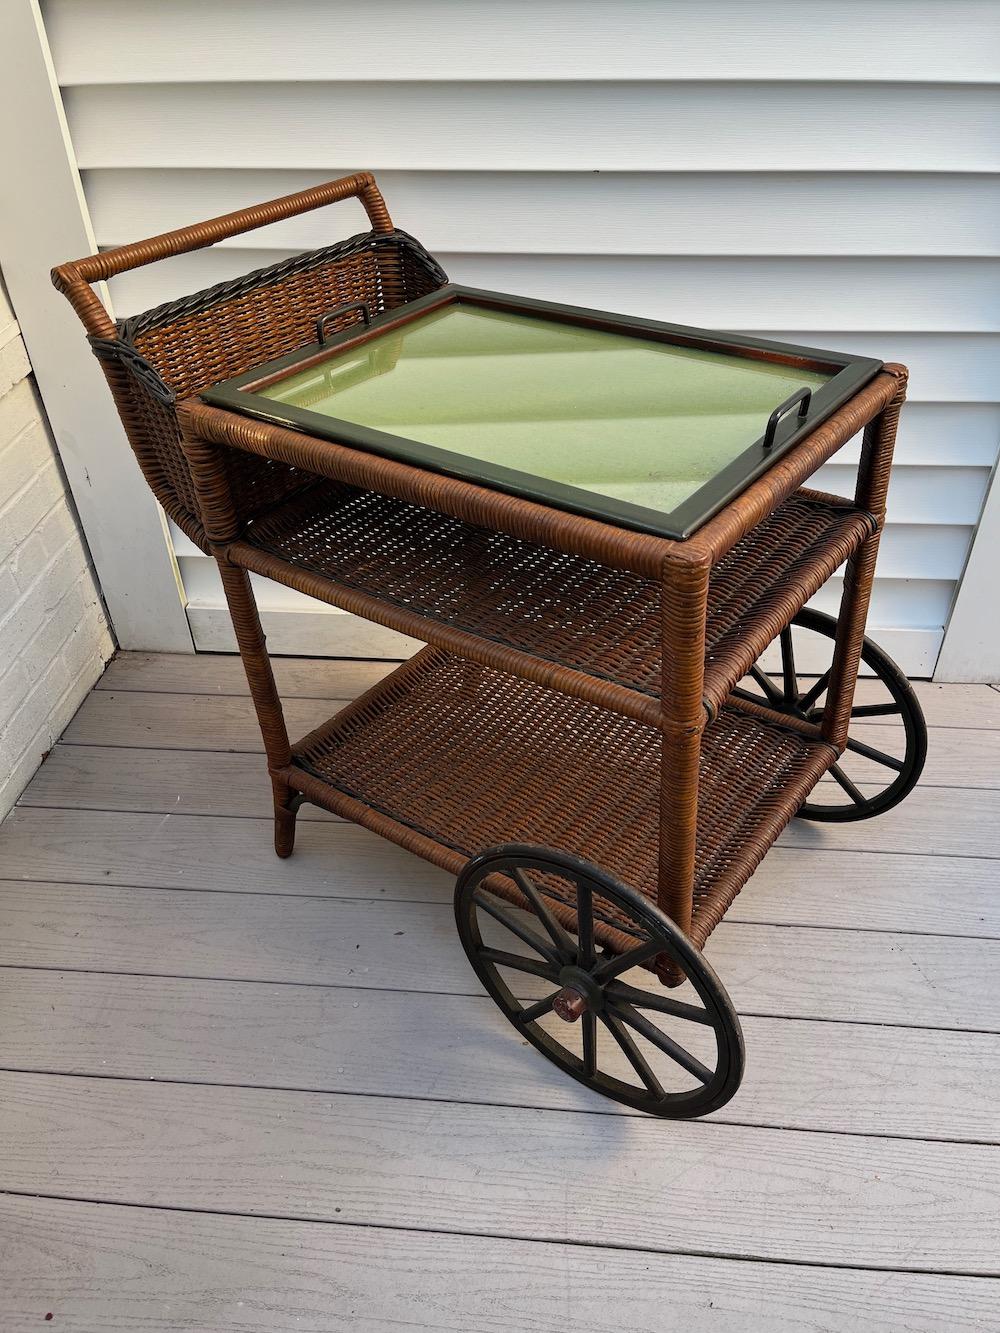 Other A Wicker Tea / Bar Cart with Serving Tray, Mid and Lower Shelf and Bottle Basket For Sale